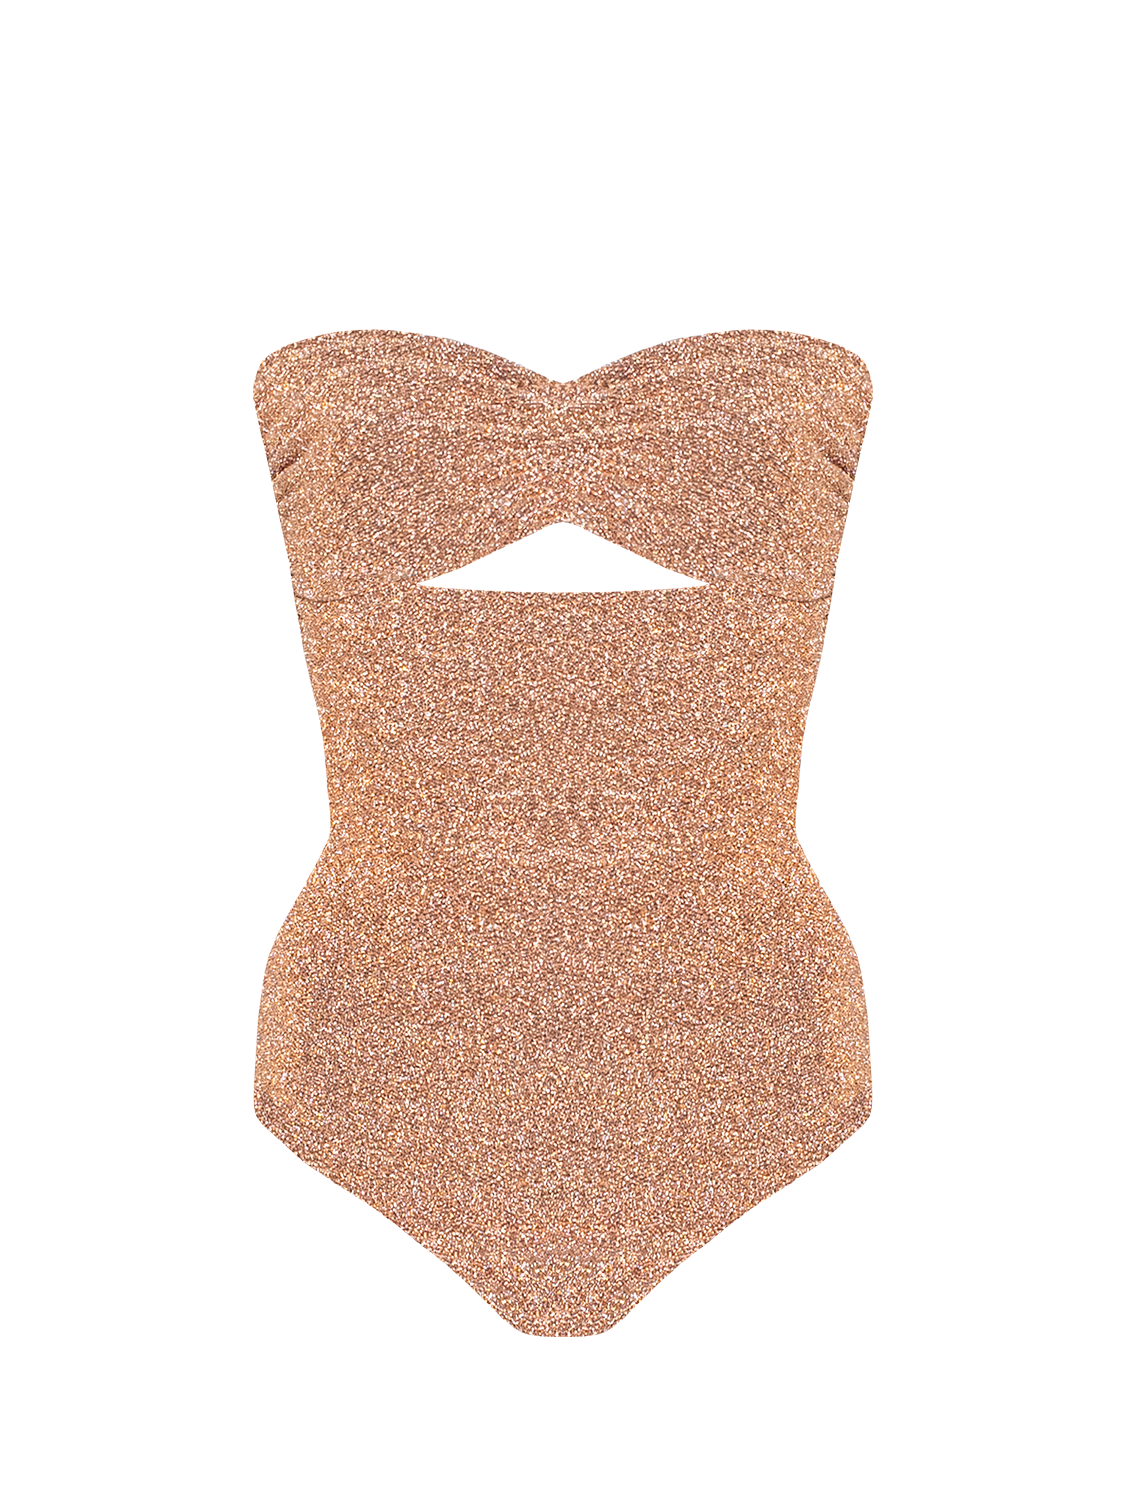 Stardust ~ Sweetheart Ruched One-piece - Light Copper